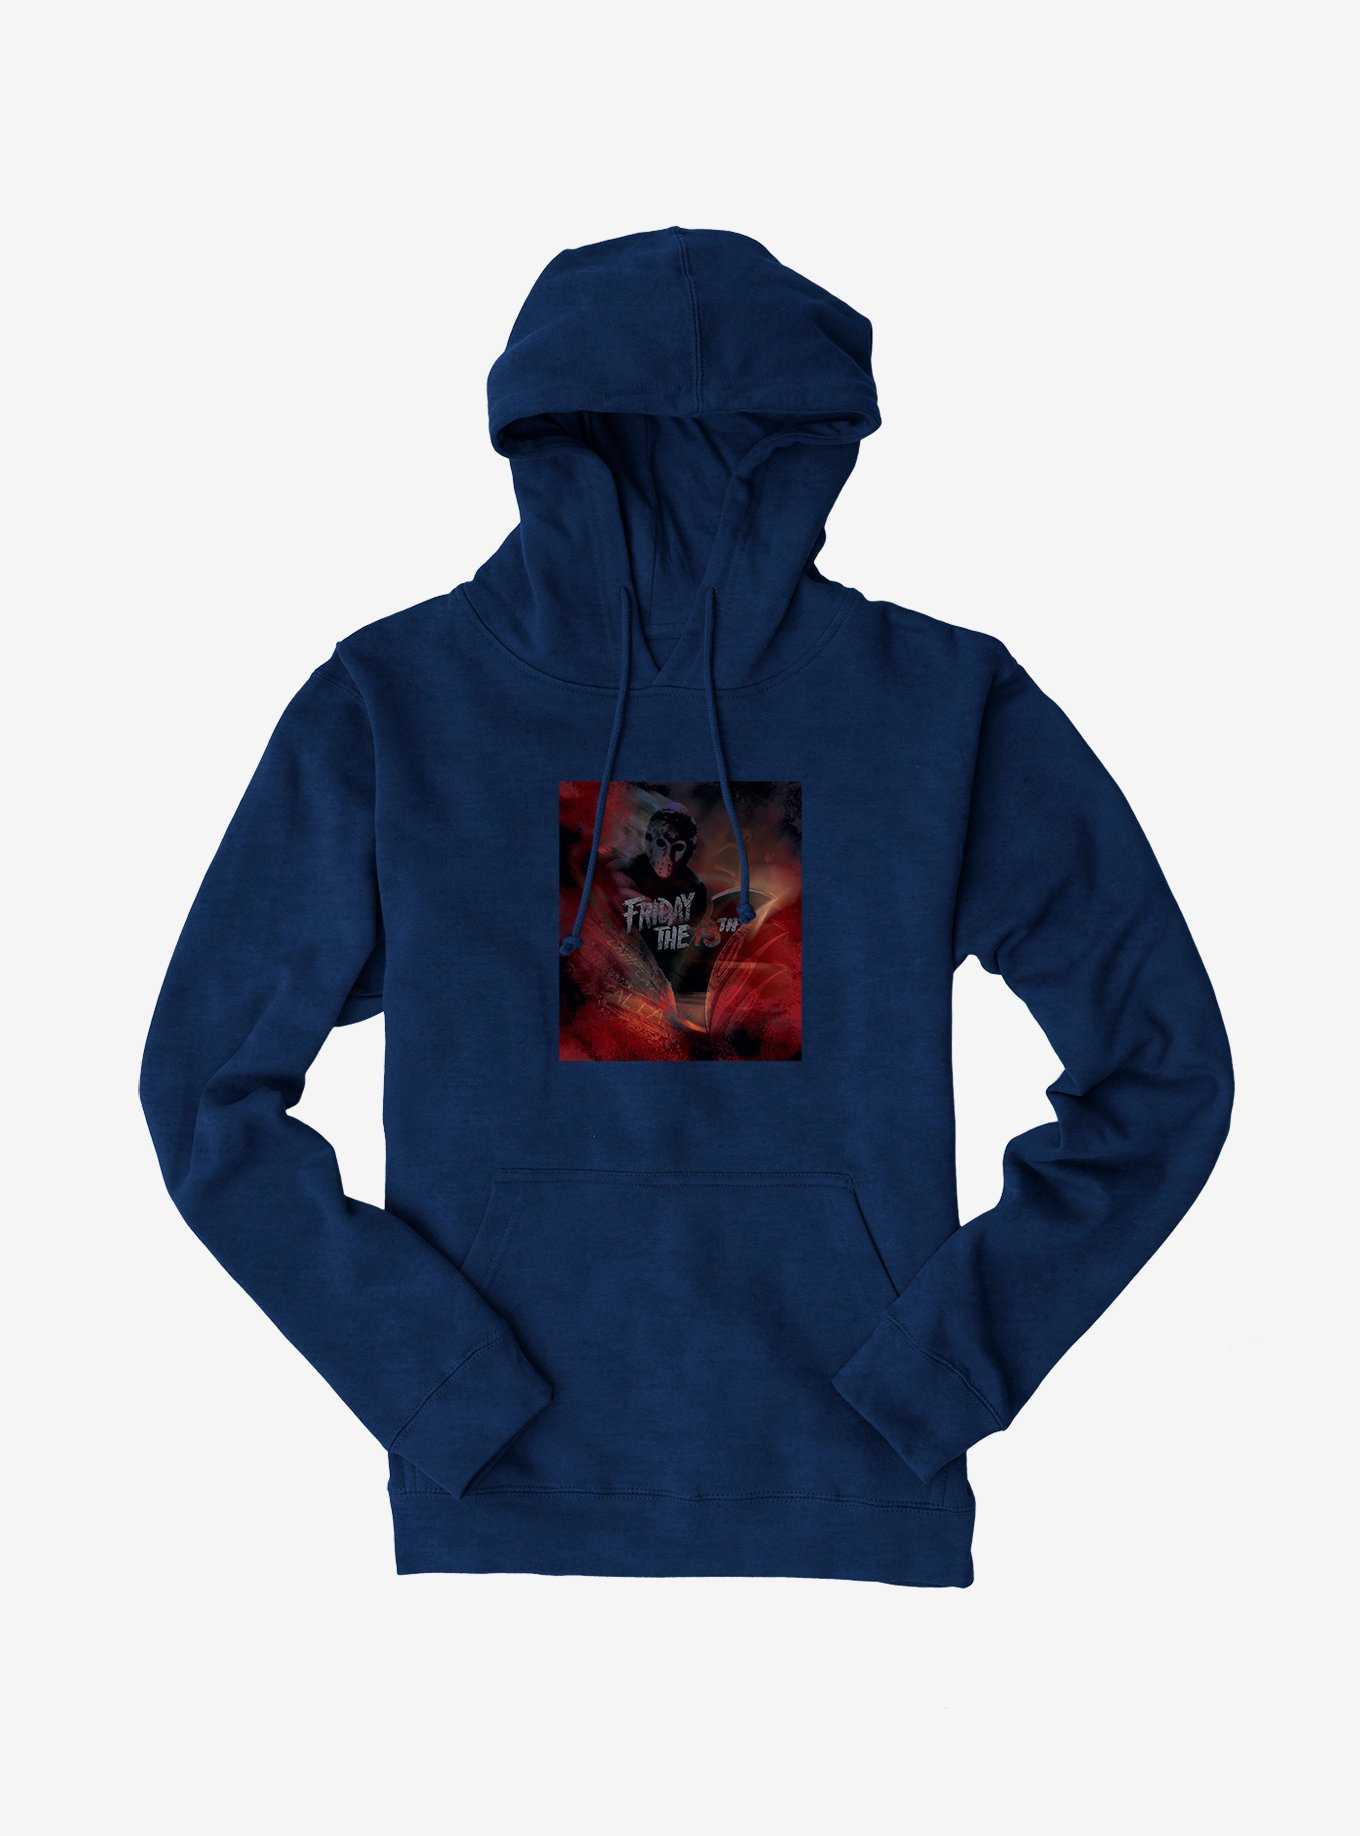 Friday The 13th Fog Hoodie, NAVY, hi-res